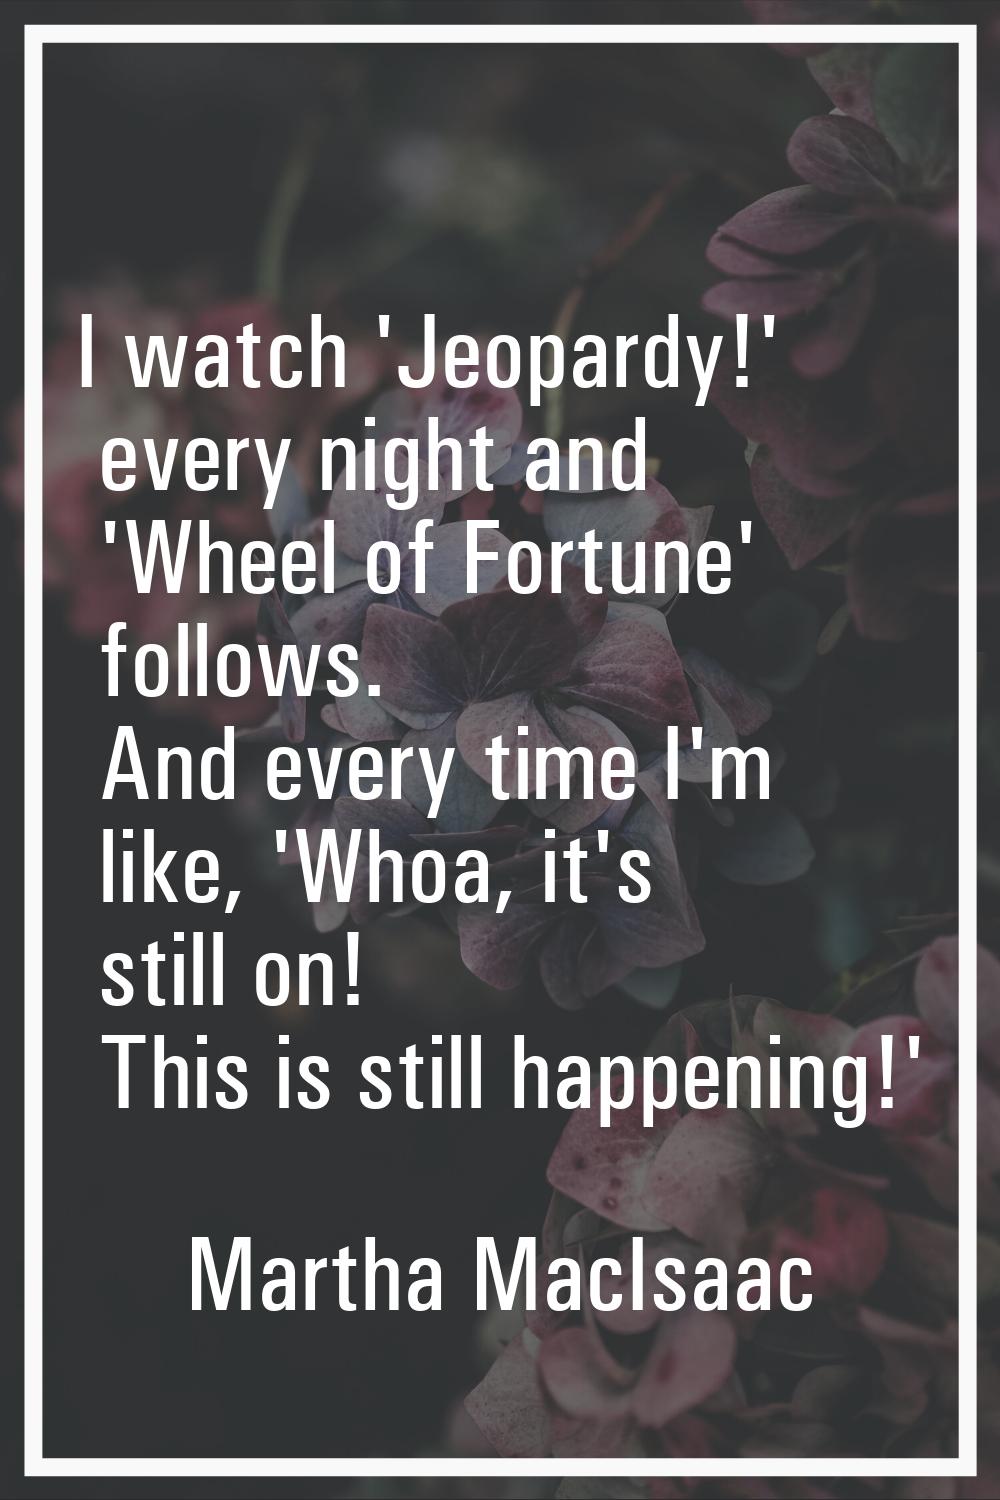 I watch 'Jeopardy!' every night and 'Wheel of Fortune' follows. And every time I'm like, 'Whoa, it'